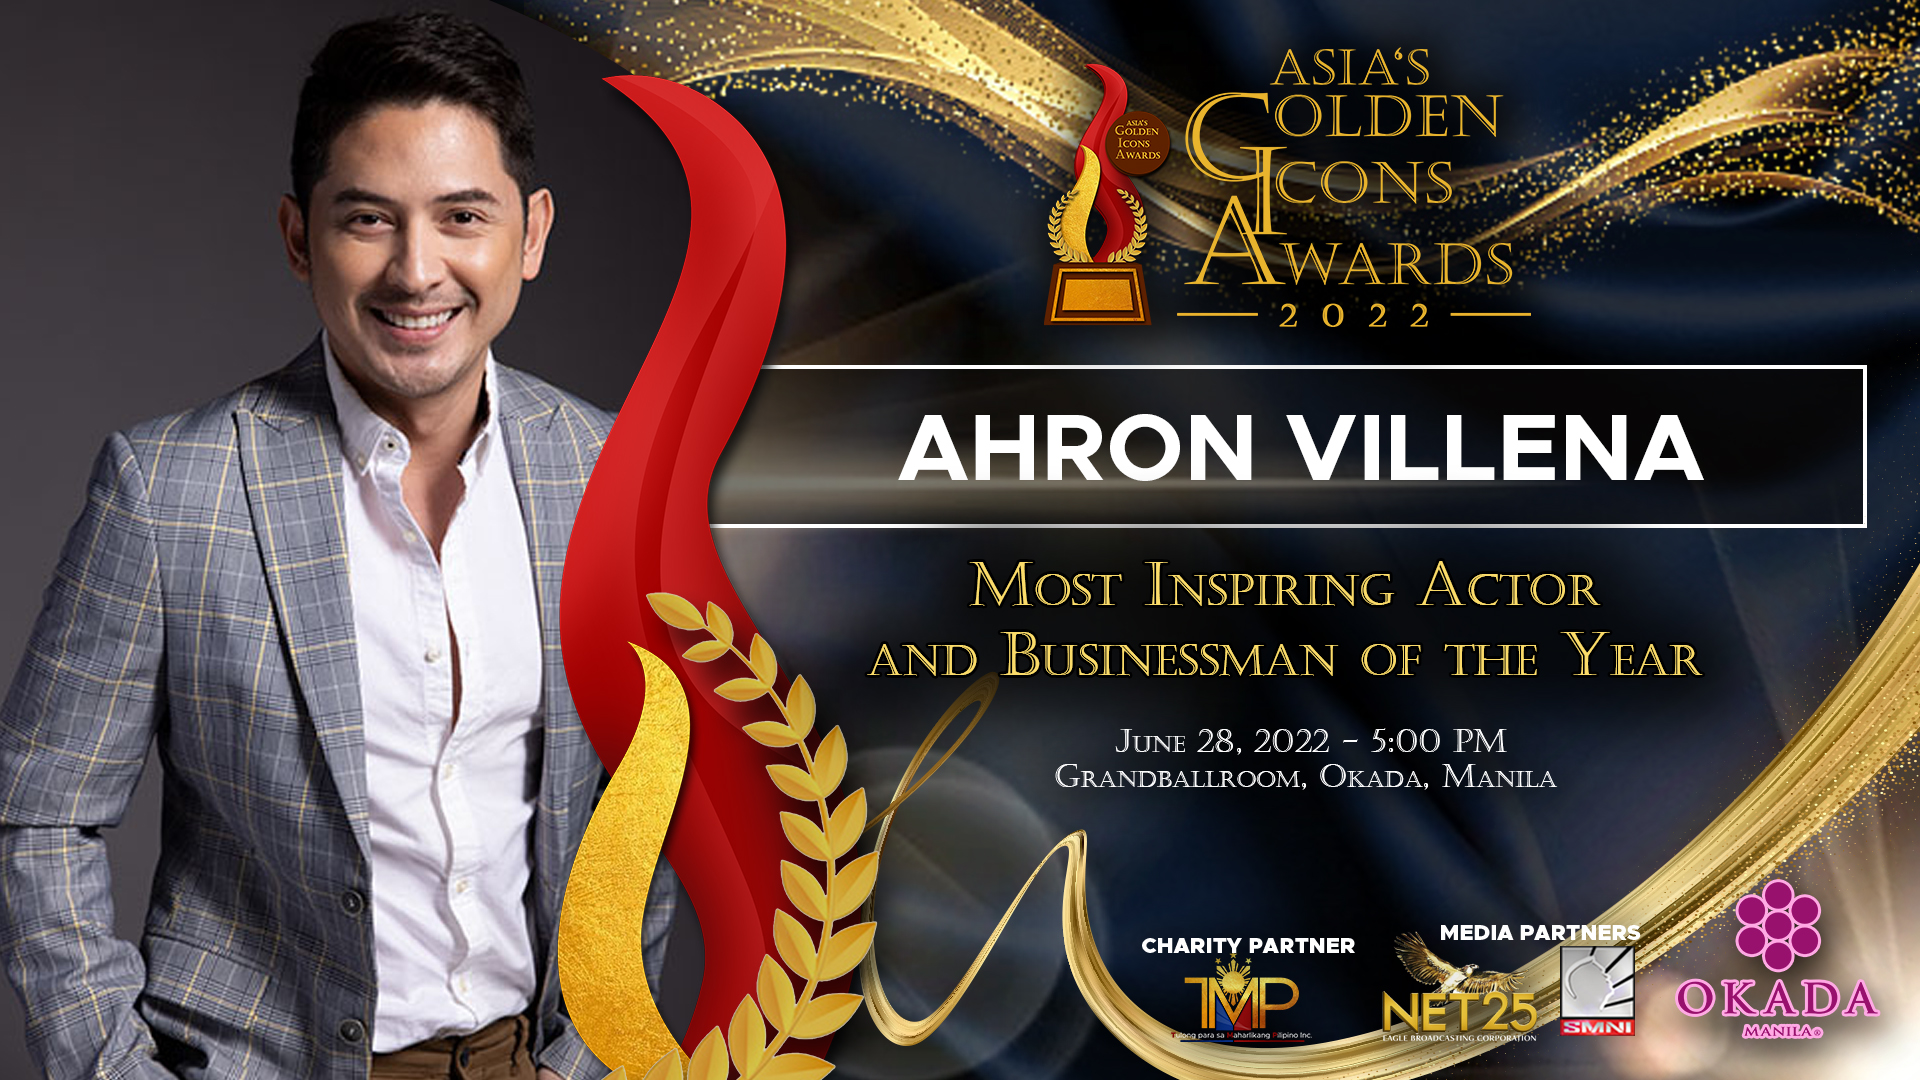 Ahron Villena (Most Inspiring Actor and Businessman of the Year)